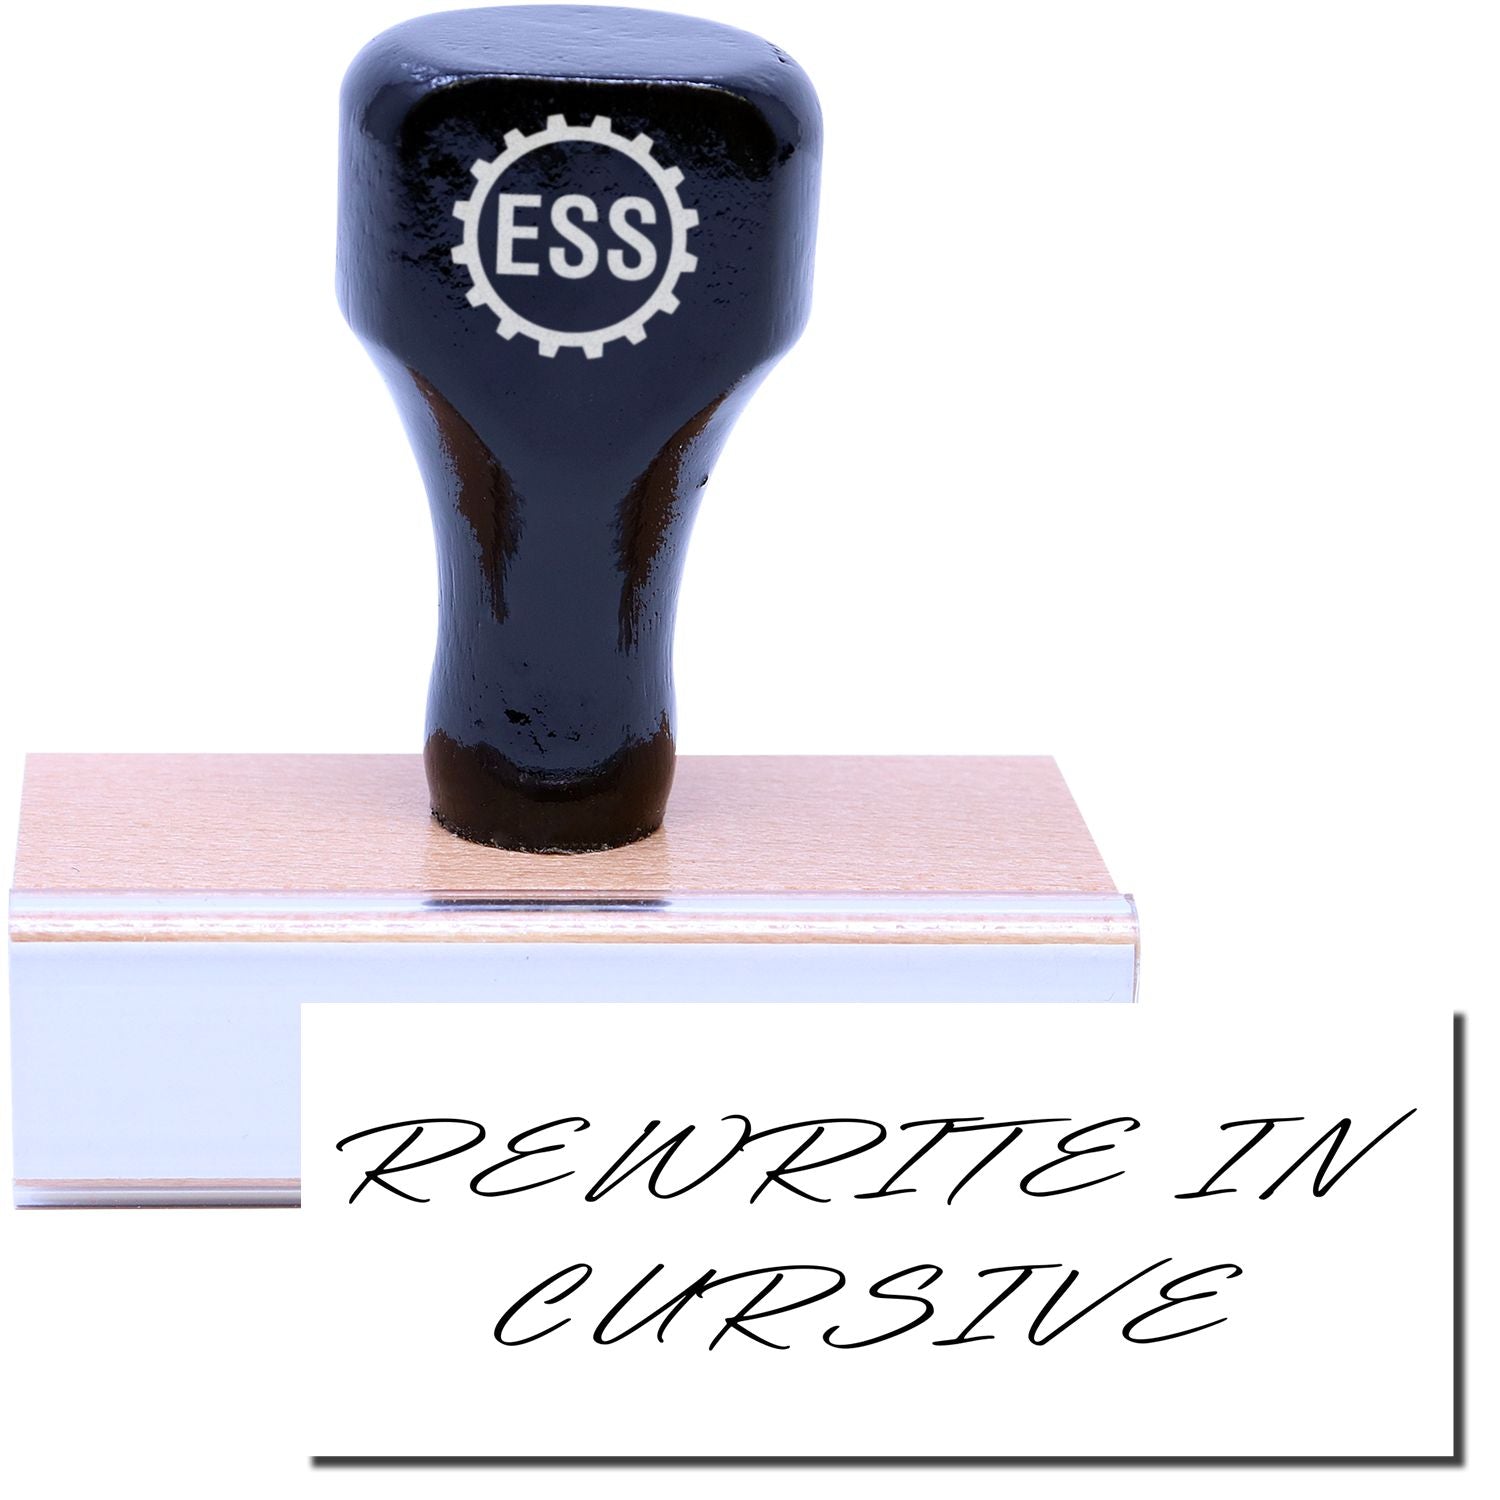 A stock office rubber stamp with a stamped image showing how the text "REWRITE IN CURSIVE" in a cursive font is displayed after stamping.